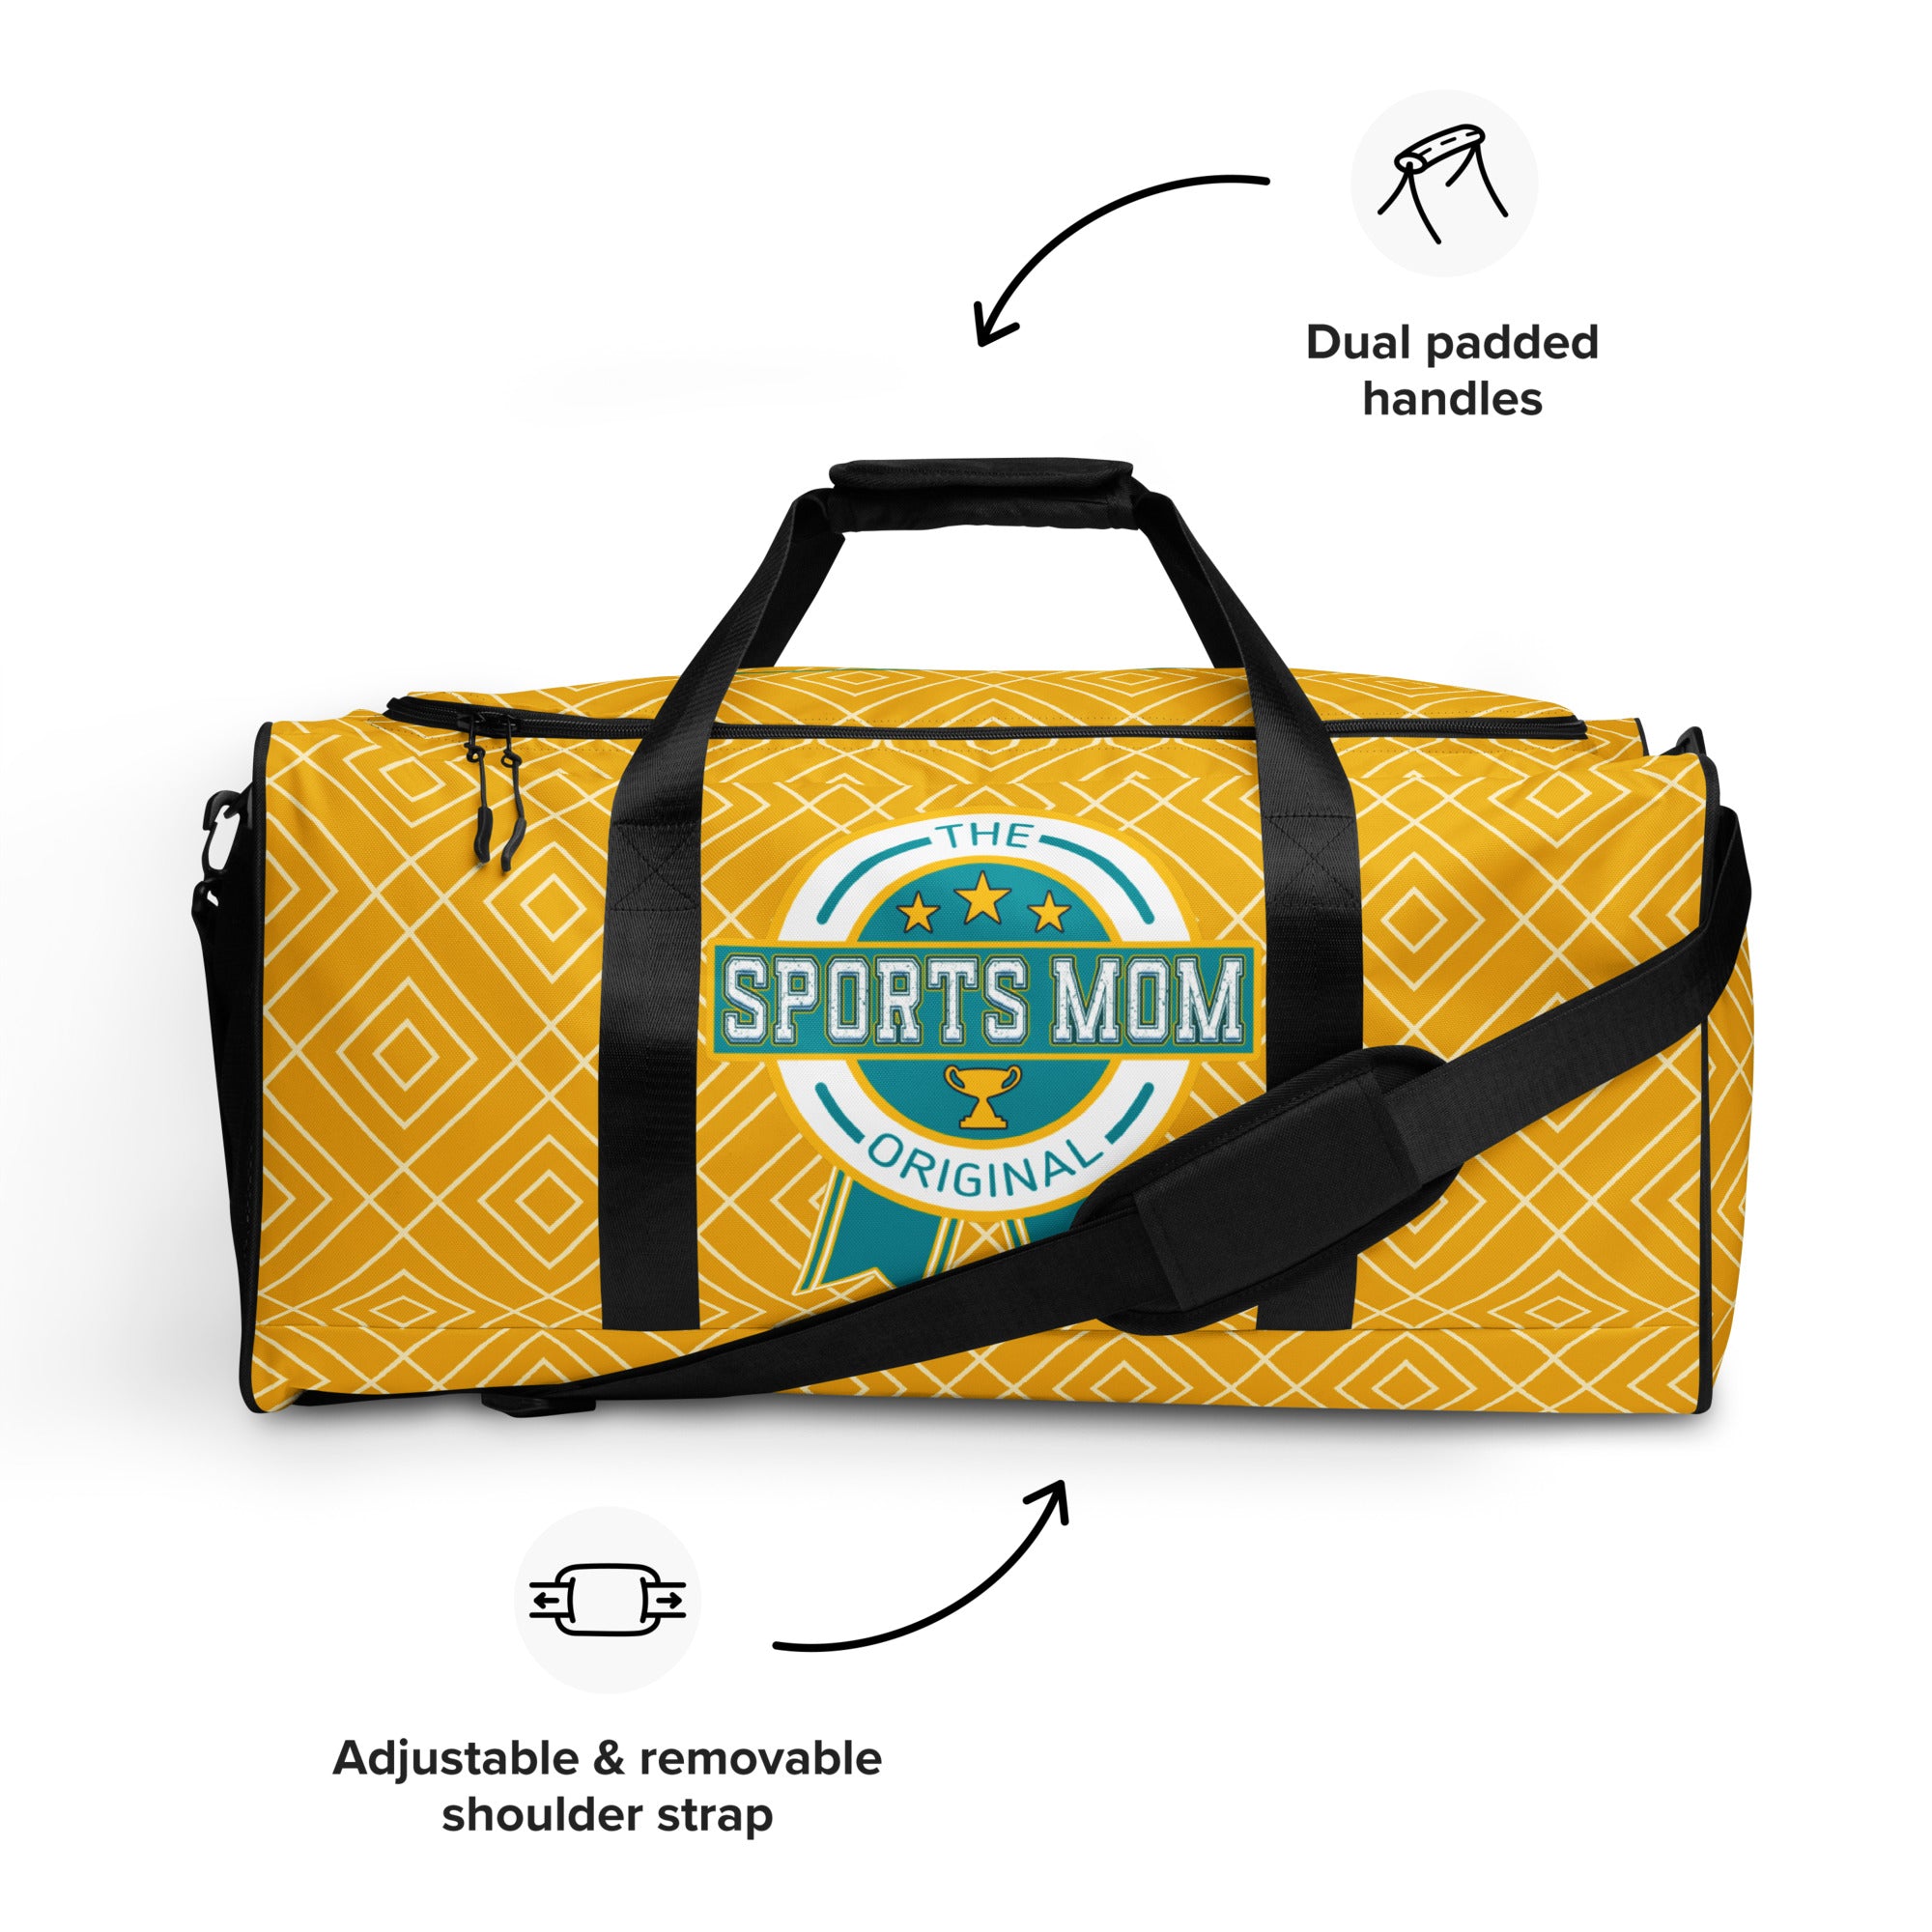 Sports Mom Ultimate Duffle Bag - Lioness